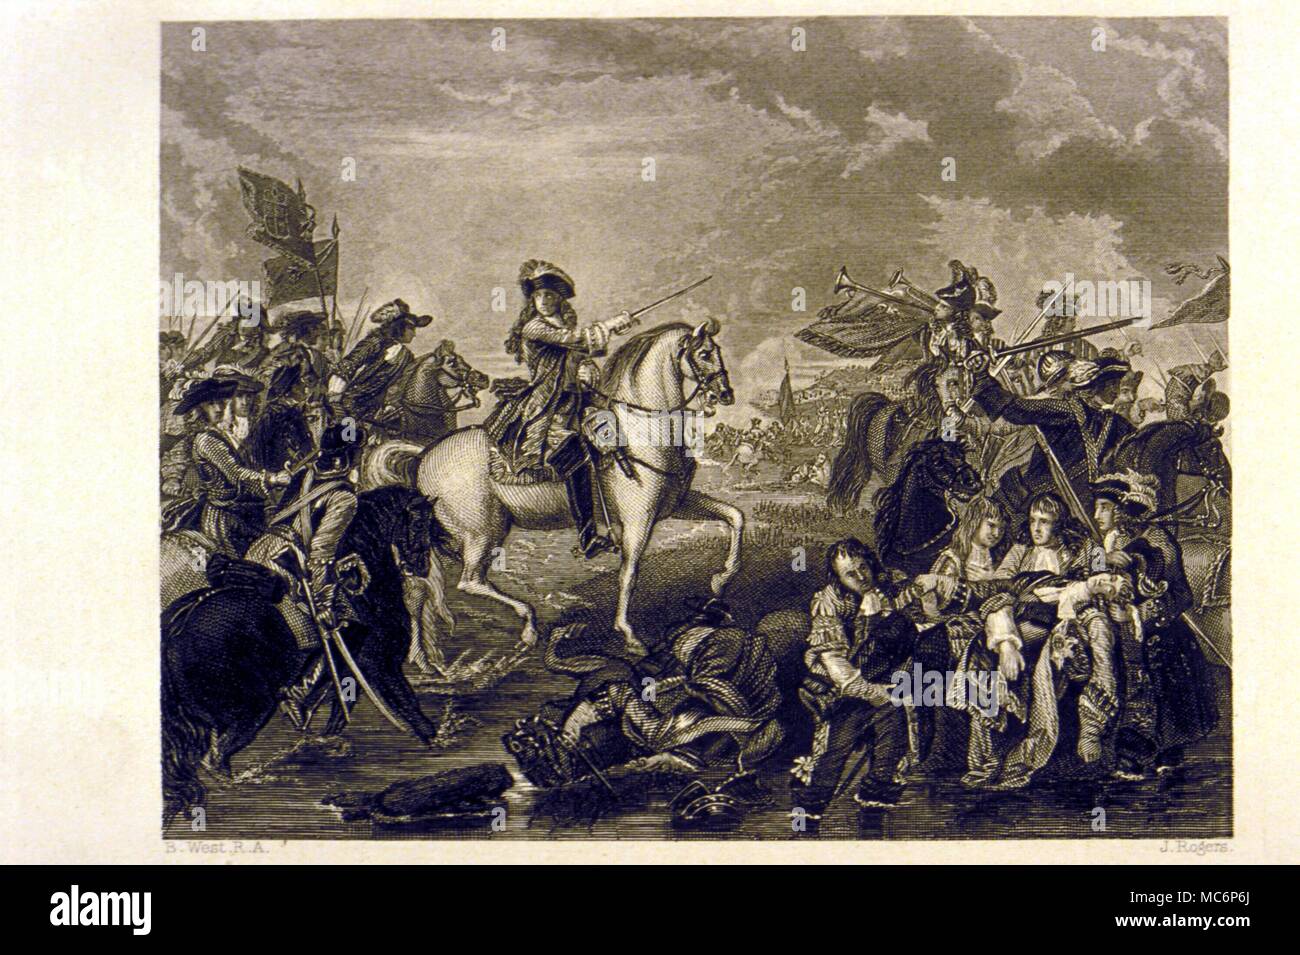 HISTORY - BRITISH The Battle of the Boyne. Steel engraving by Rogers, after the painting by Benjamin West, c. 1855. Stock Photo